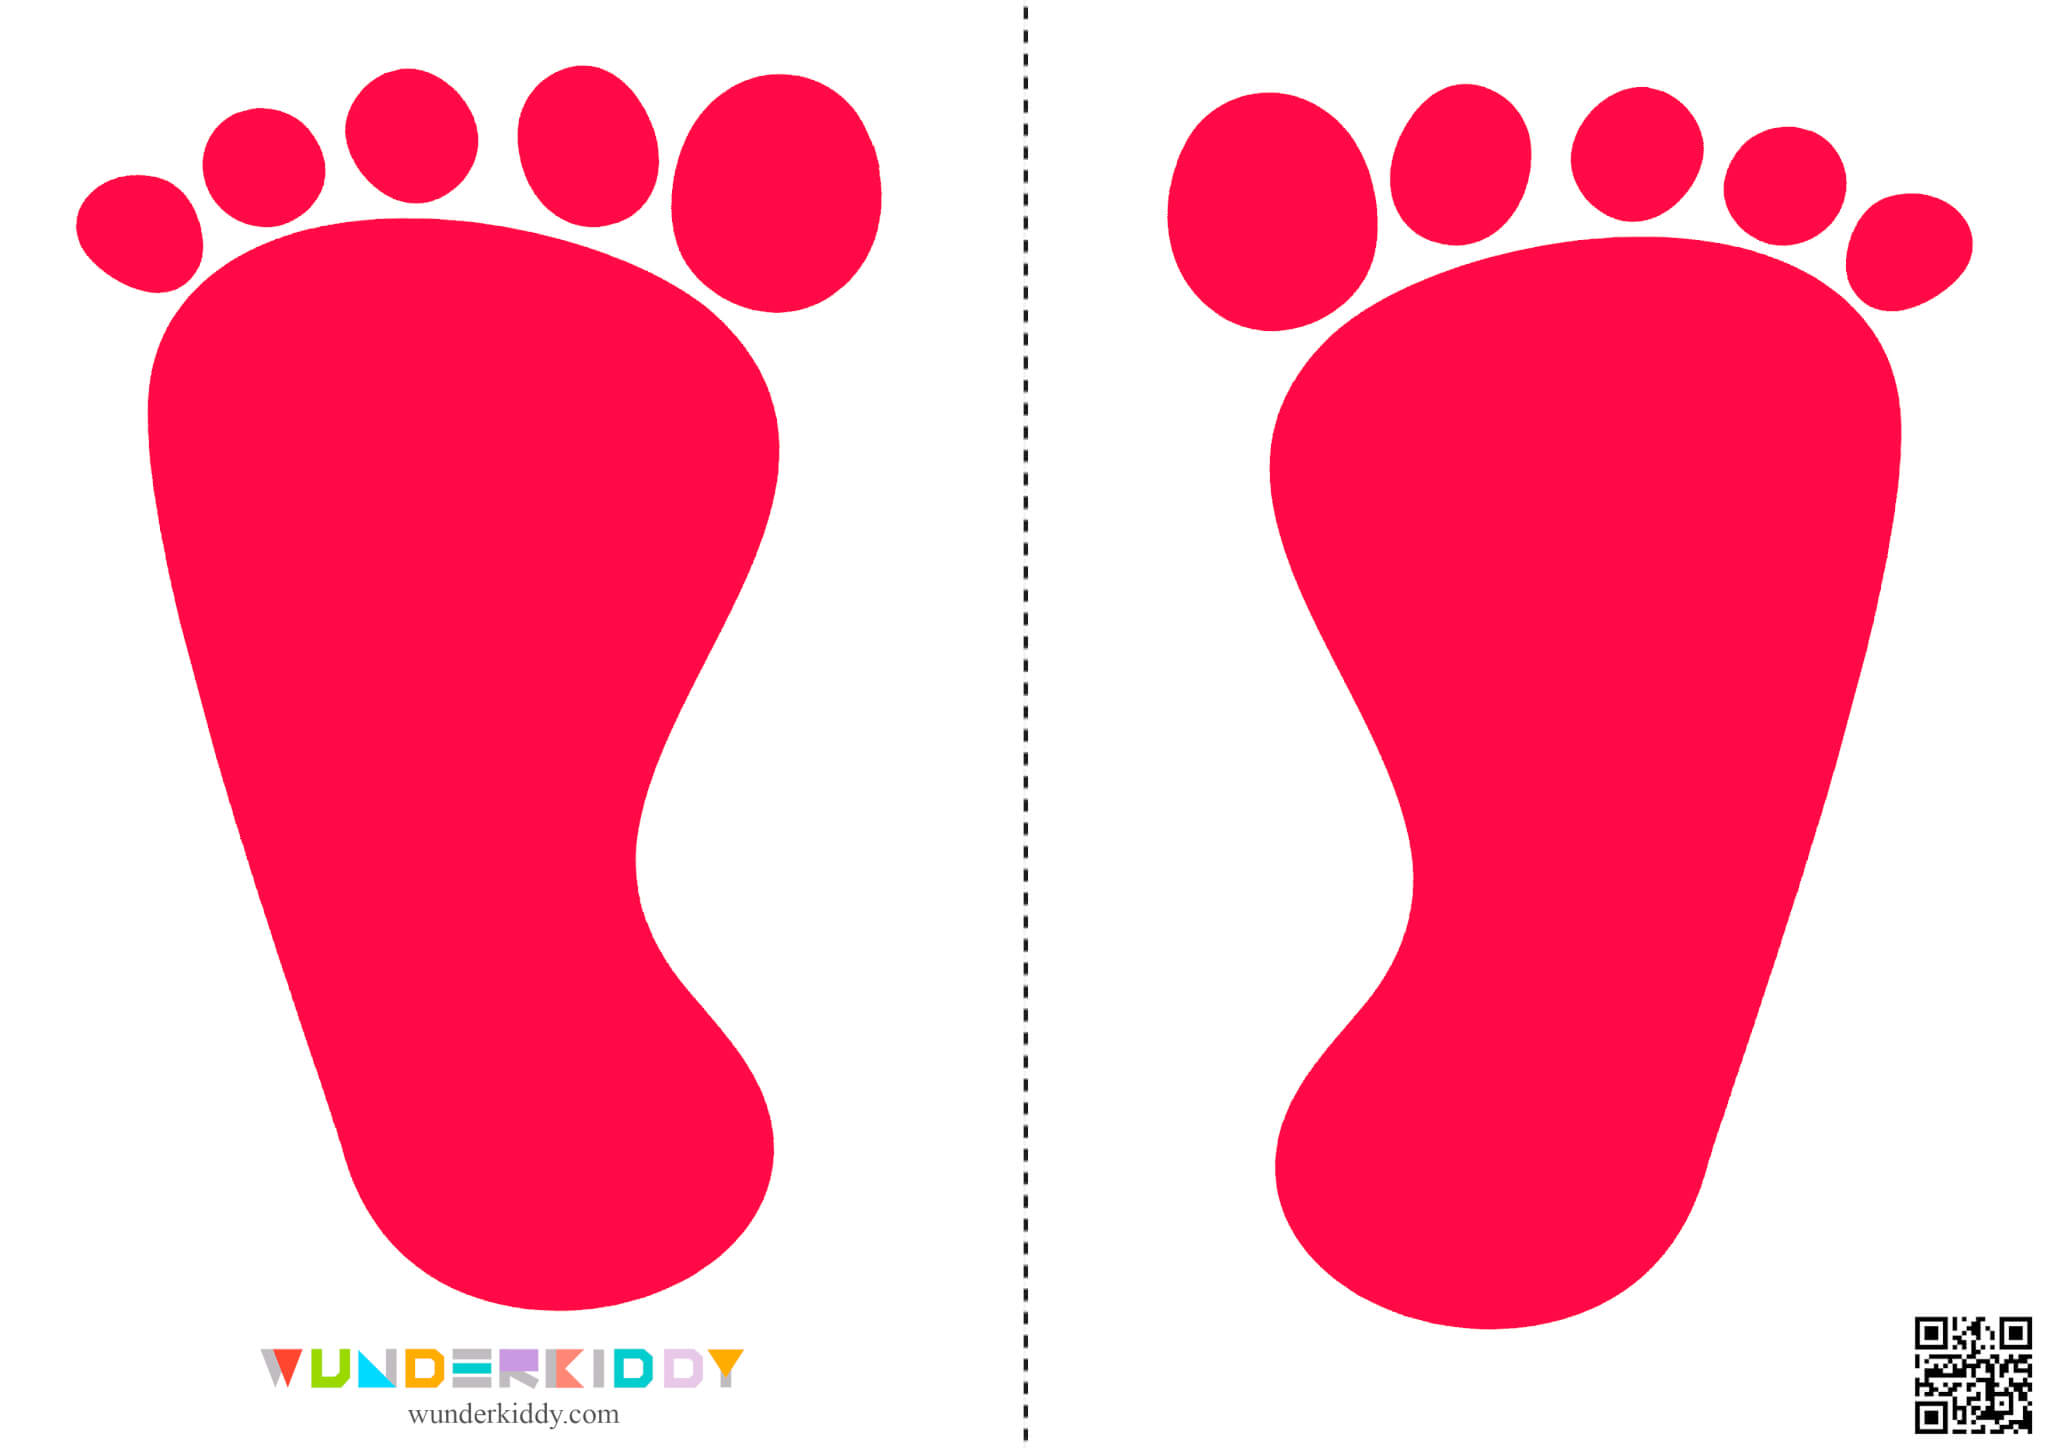 Hands and Feet Color Sensory Path - Image 12